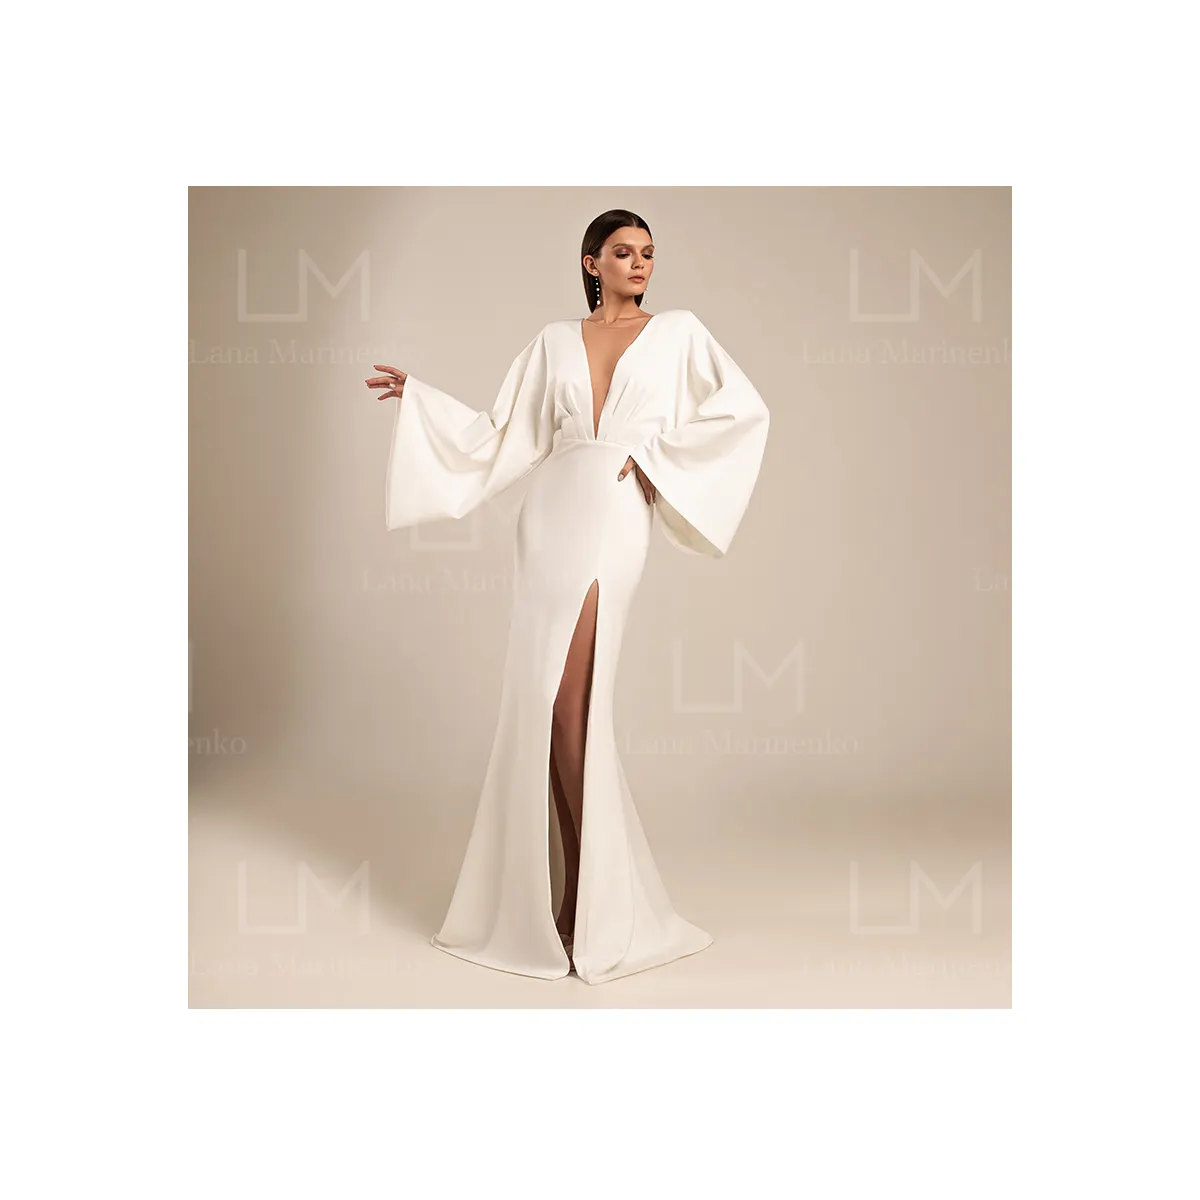 Custom design V-neck back thigh high slit sheath with cut-out "Morgan" woman's wedding dress with wide long sleeves for bride